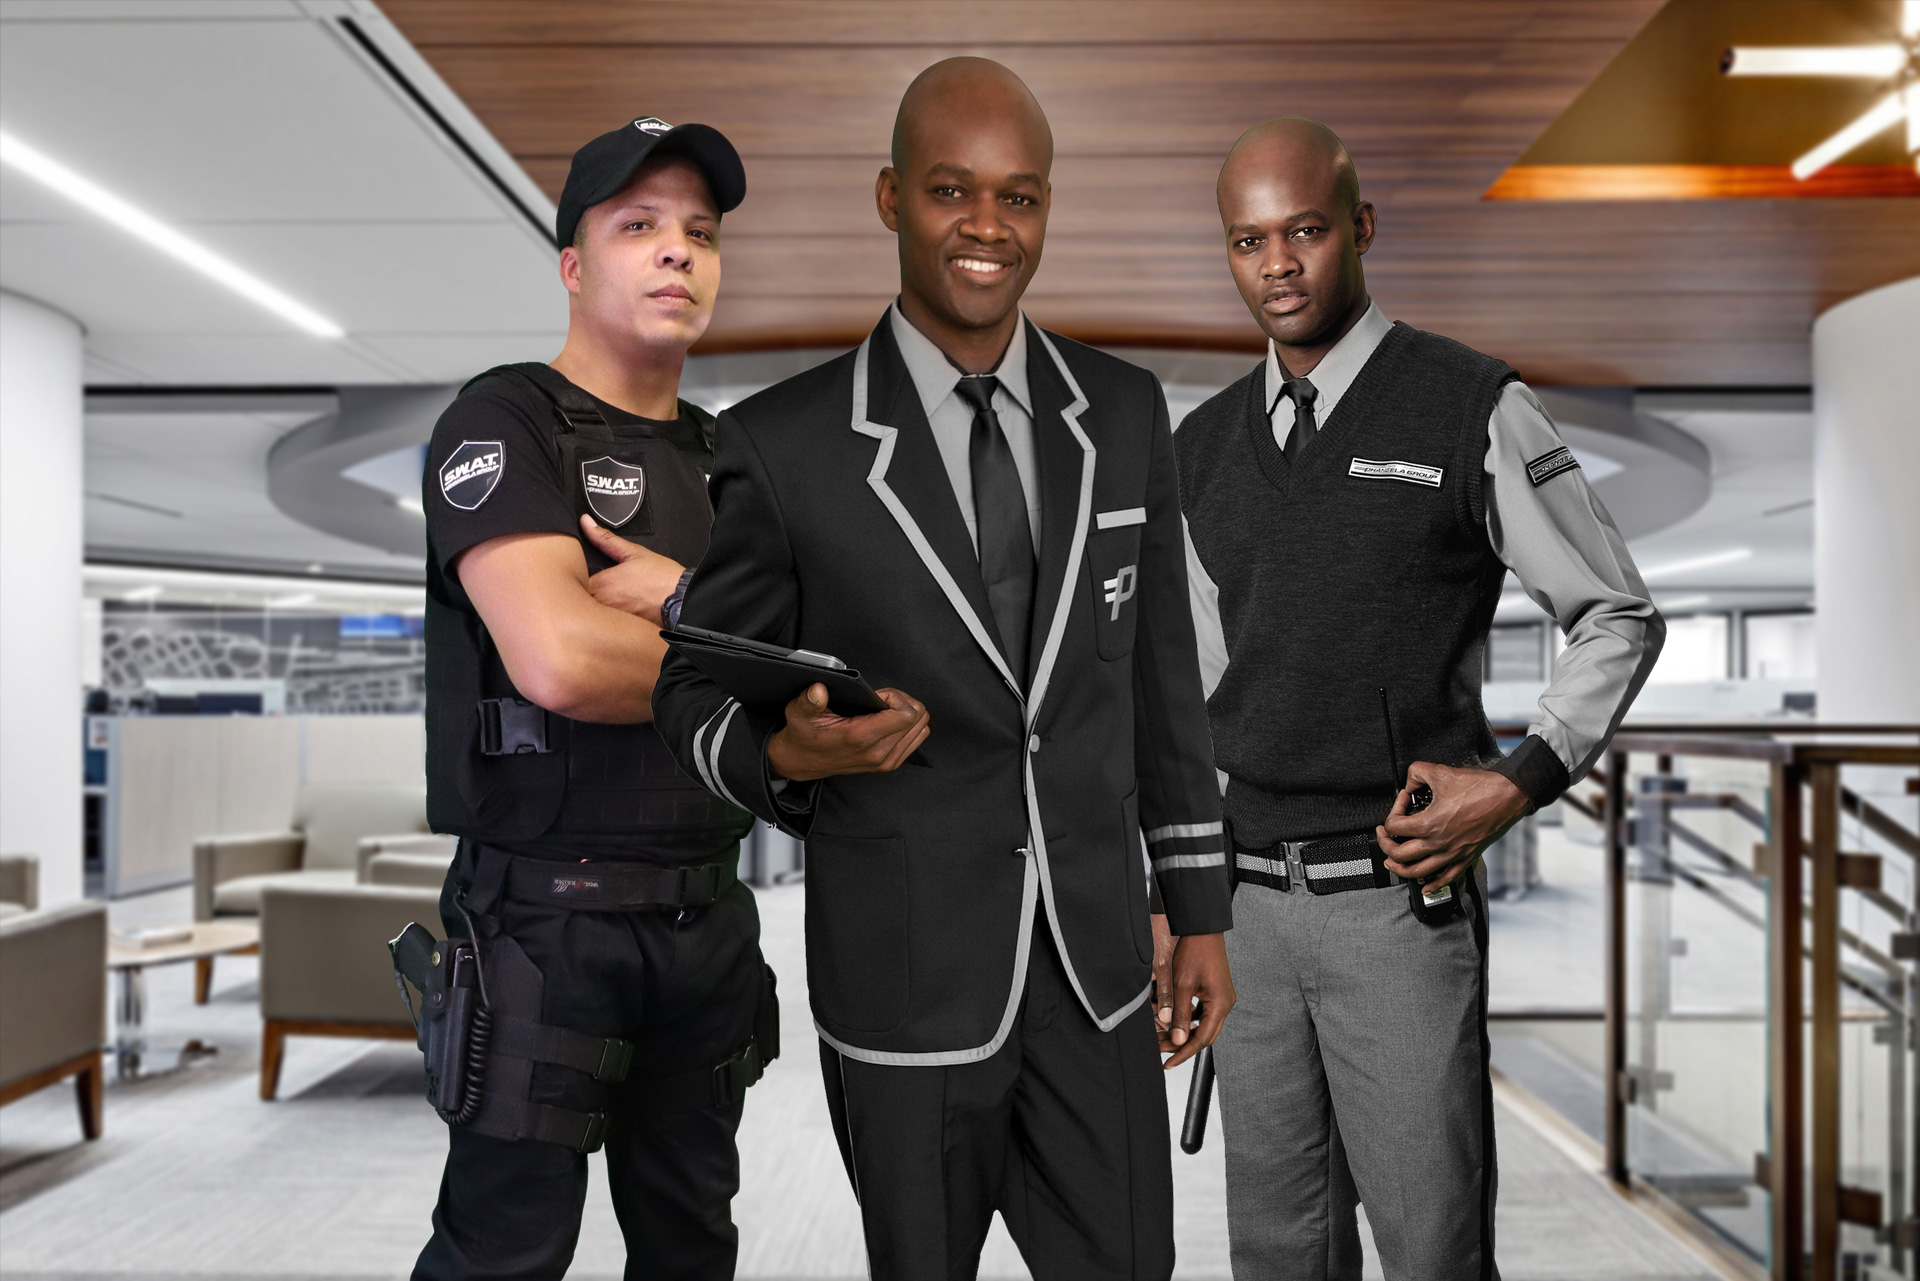 Commercial Security Services